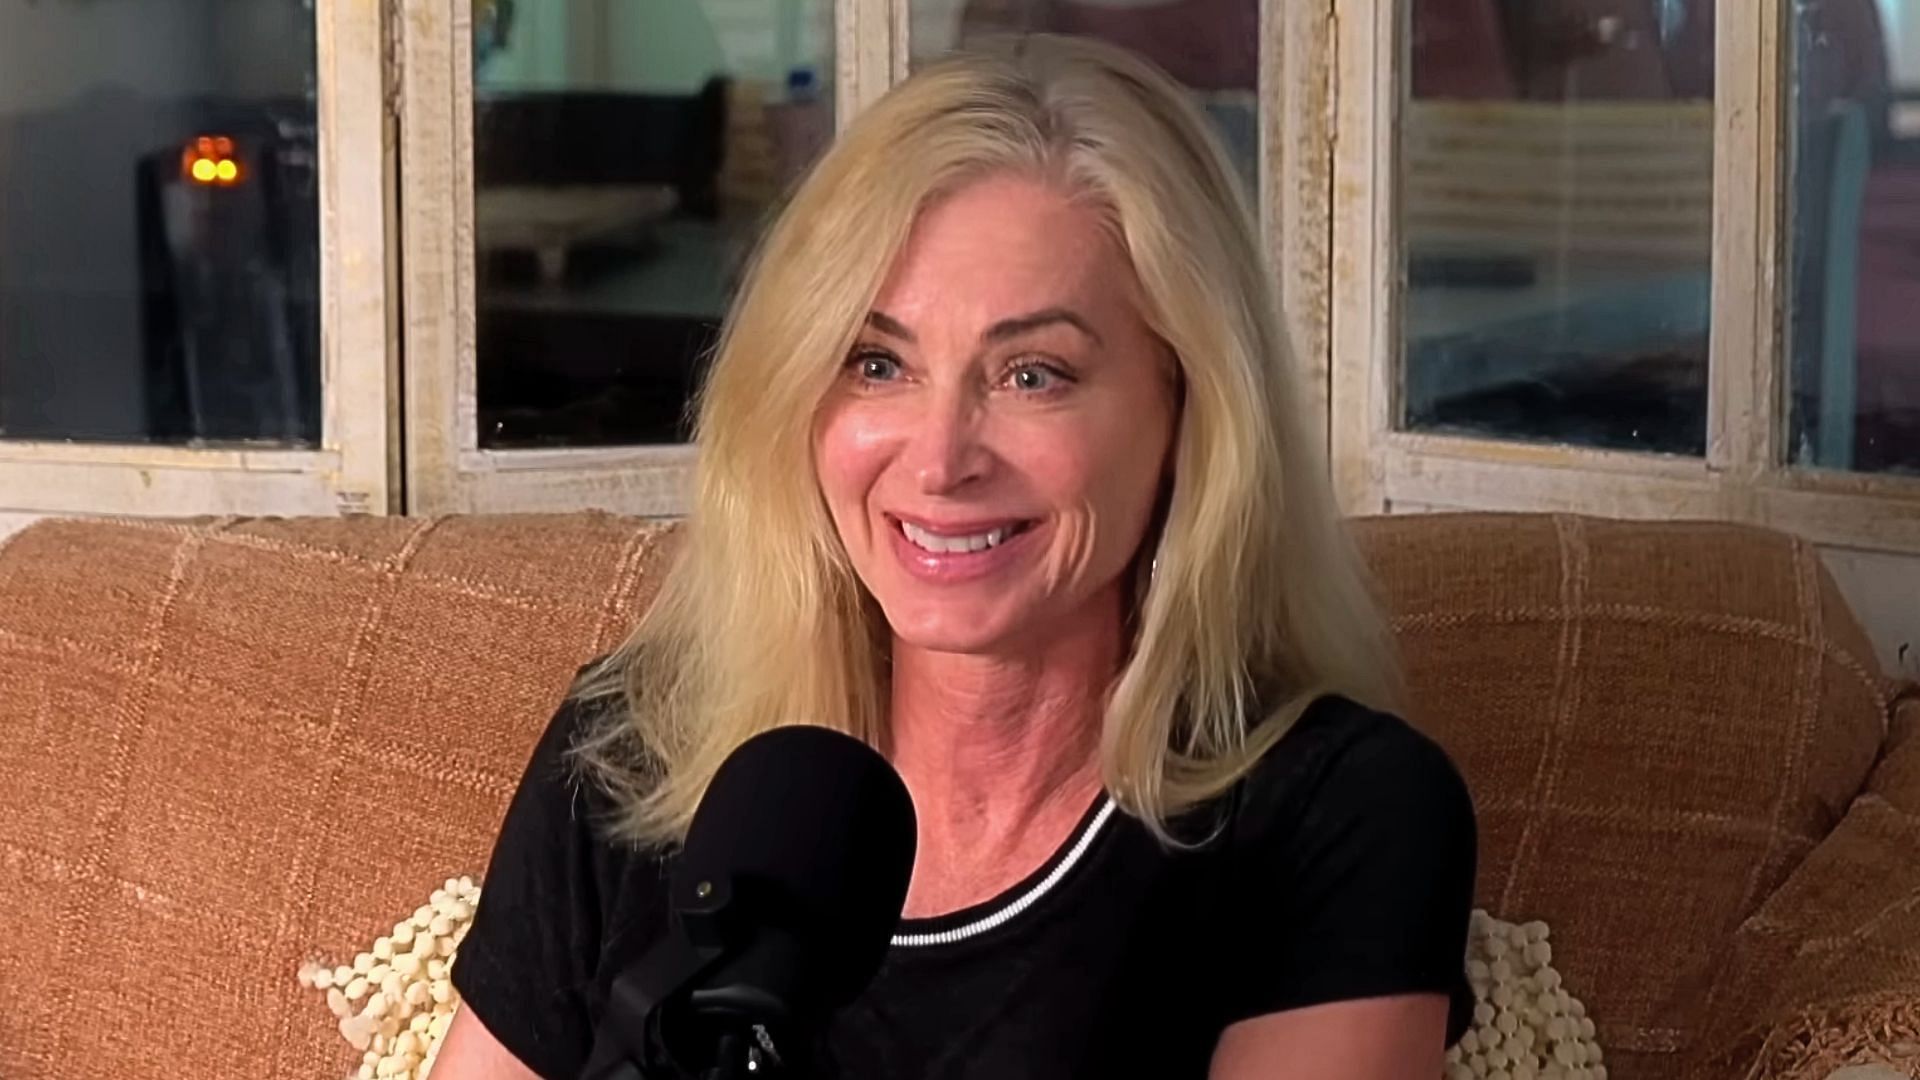 Actress Eileen Davidson has featured across TV shows, movies, and soap operas (Image via YouTube/State Of Mind with Maurice Benard, 4:10)